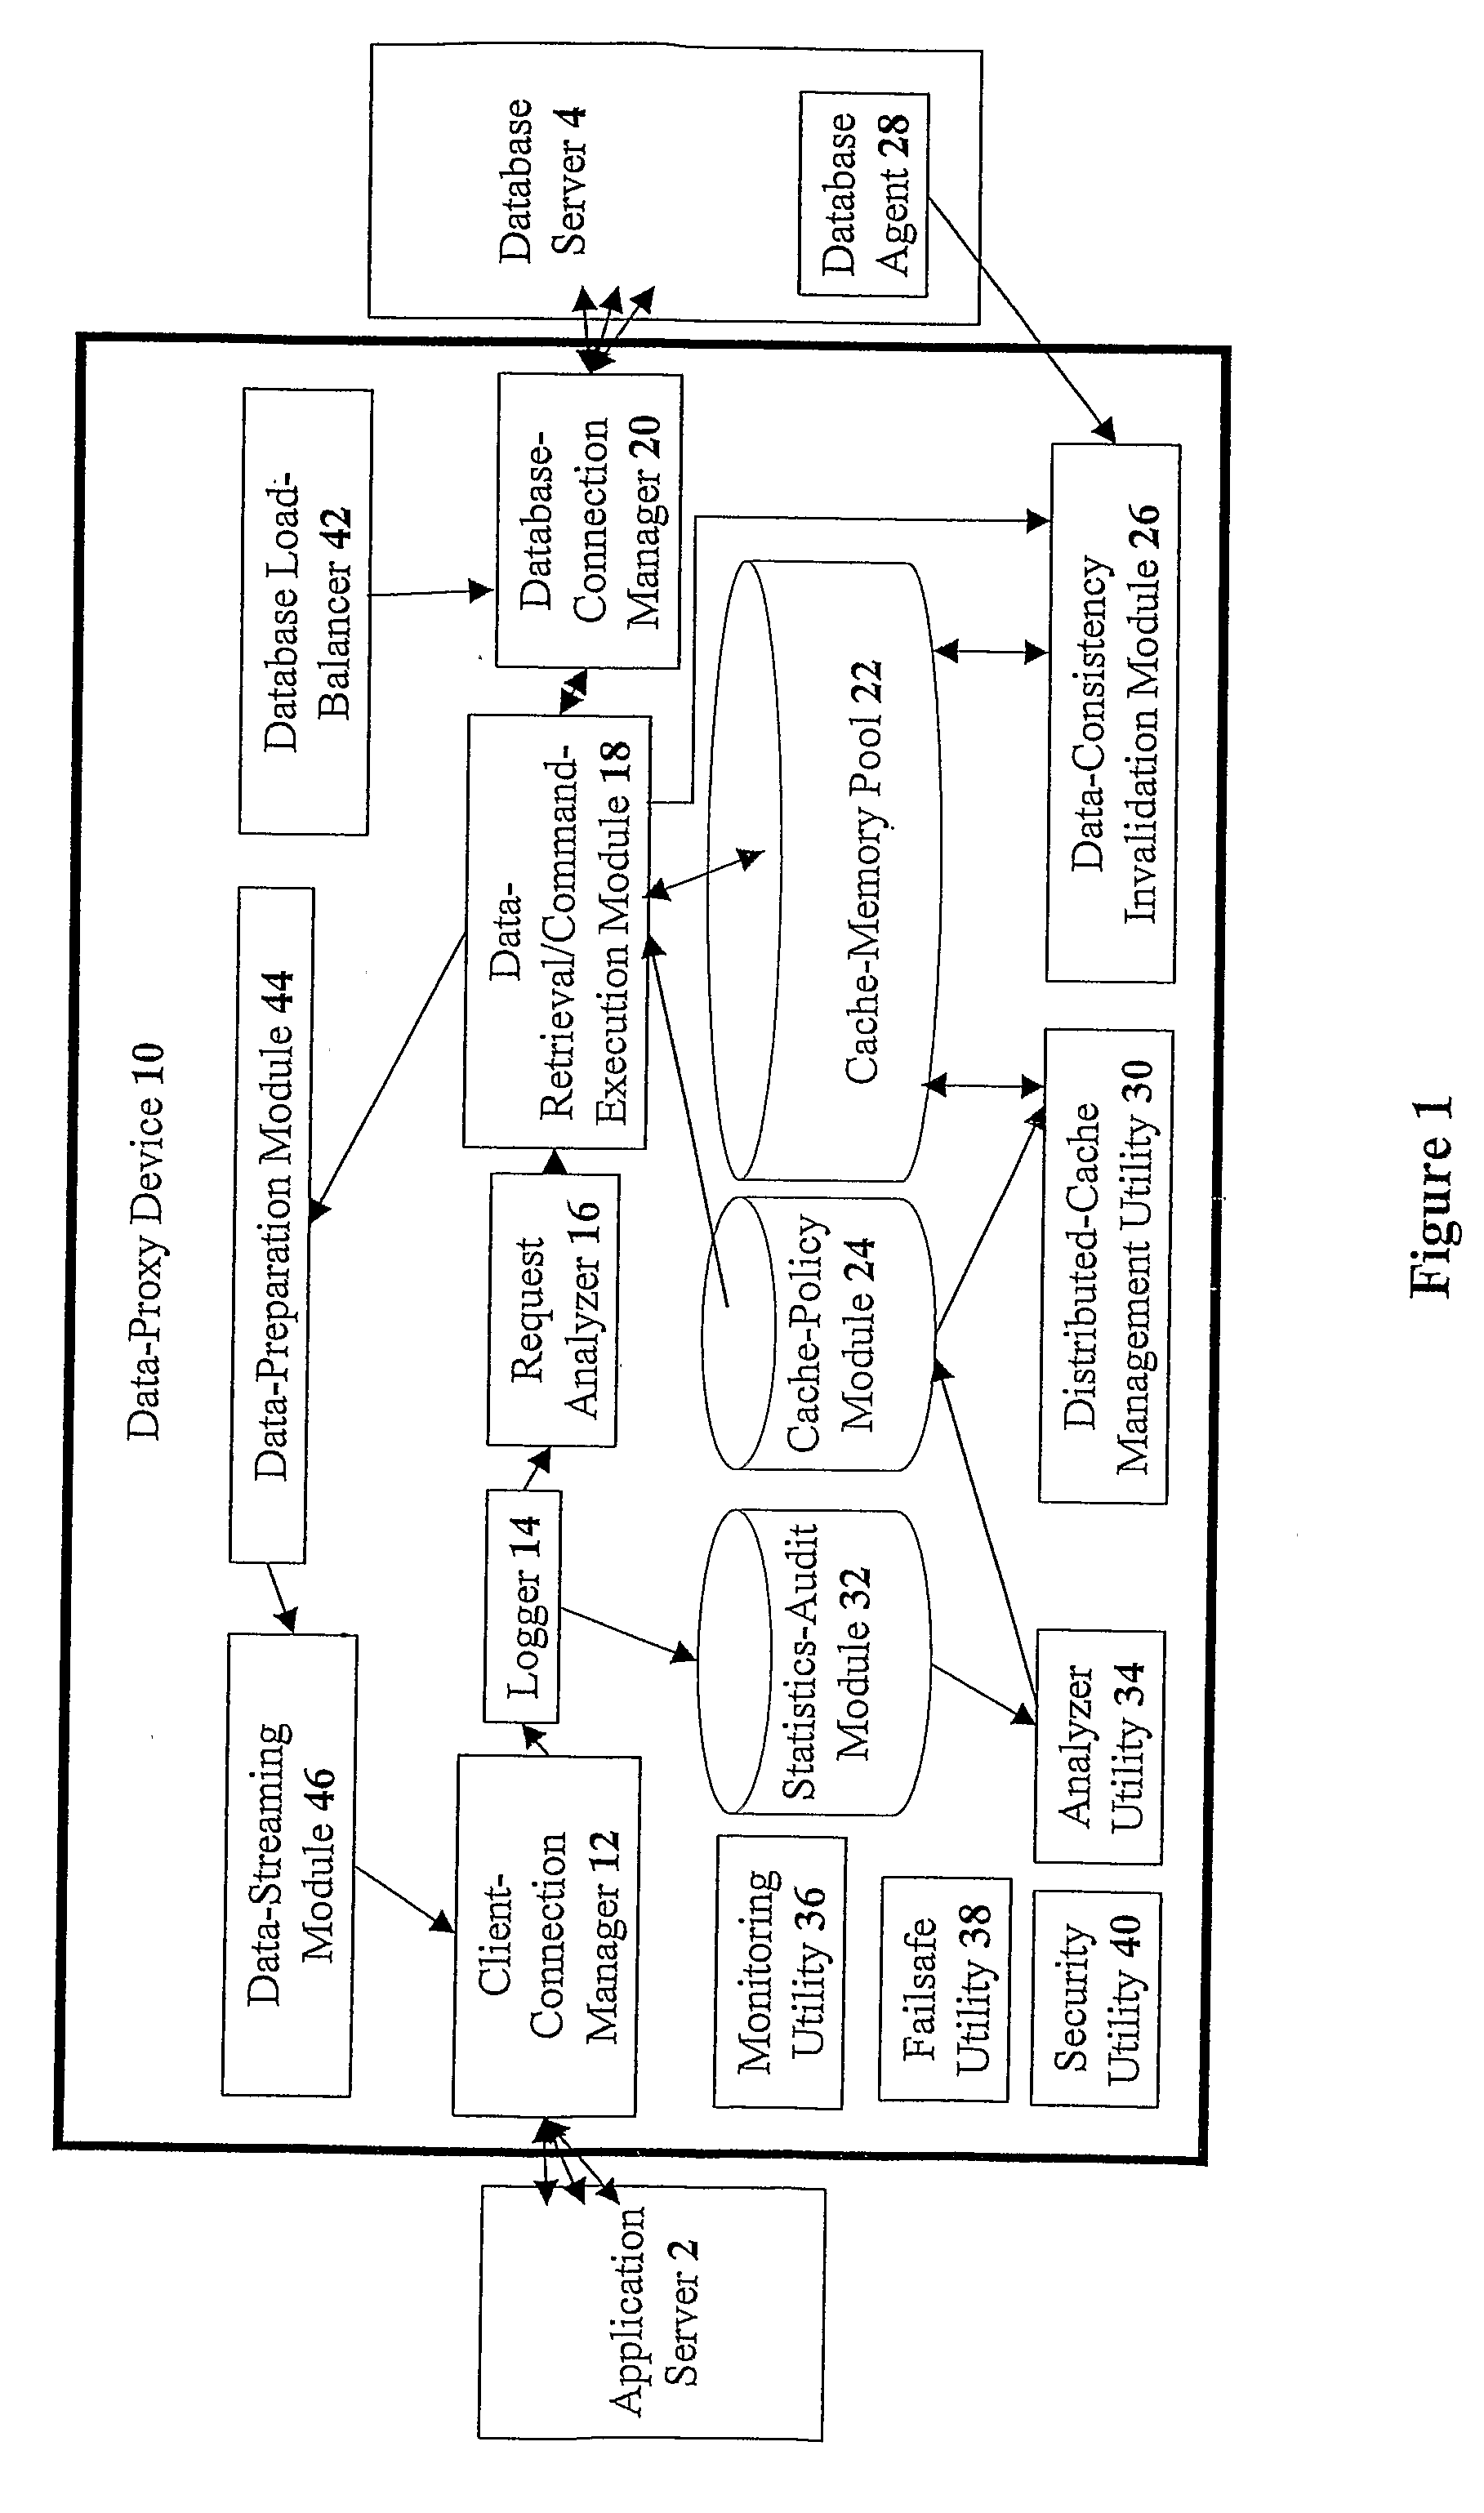 Devices for providing distributable middleware data proxy between application servers and database servers